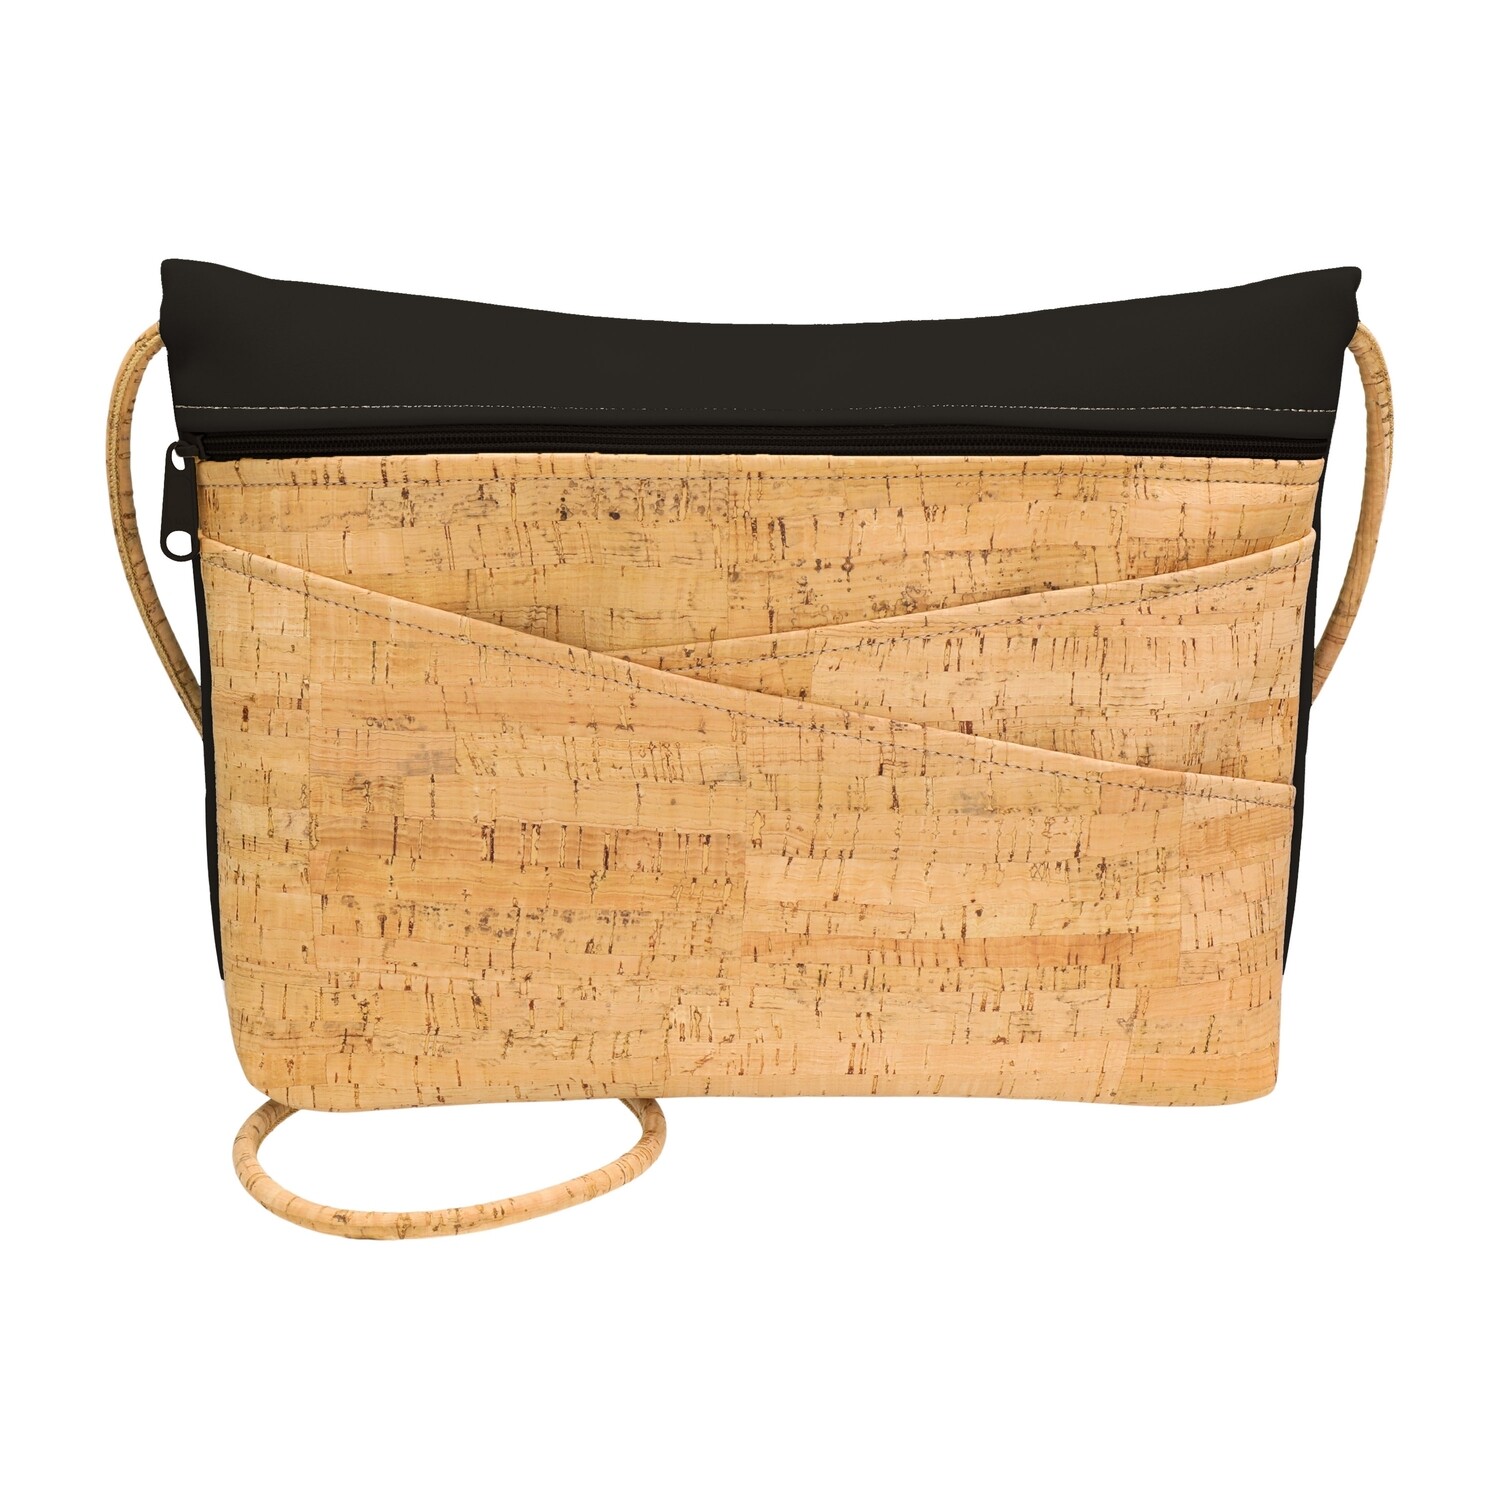 Be Lively Small Messenger - Rustic Cork - Black